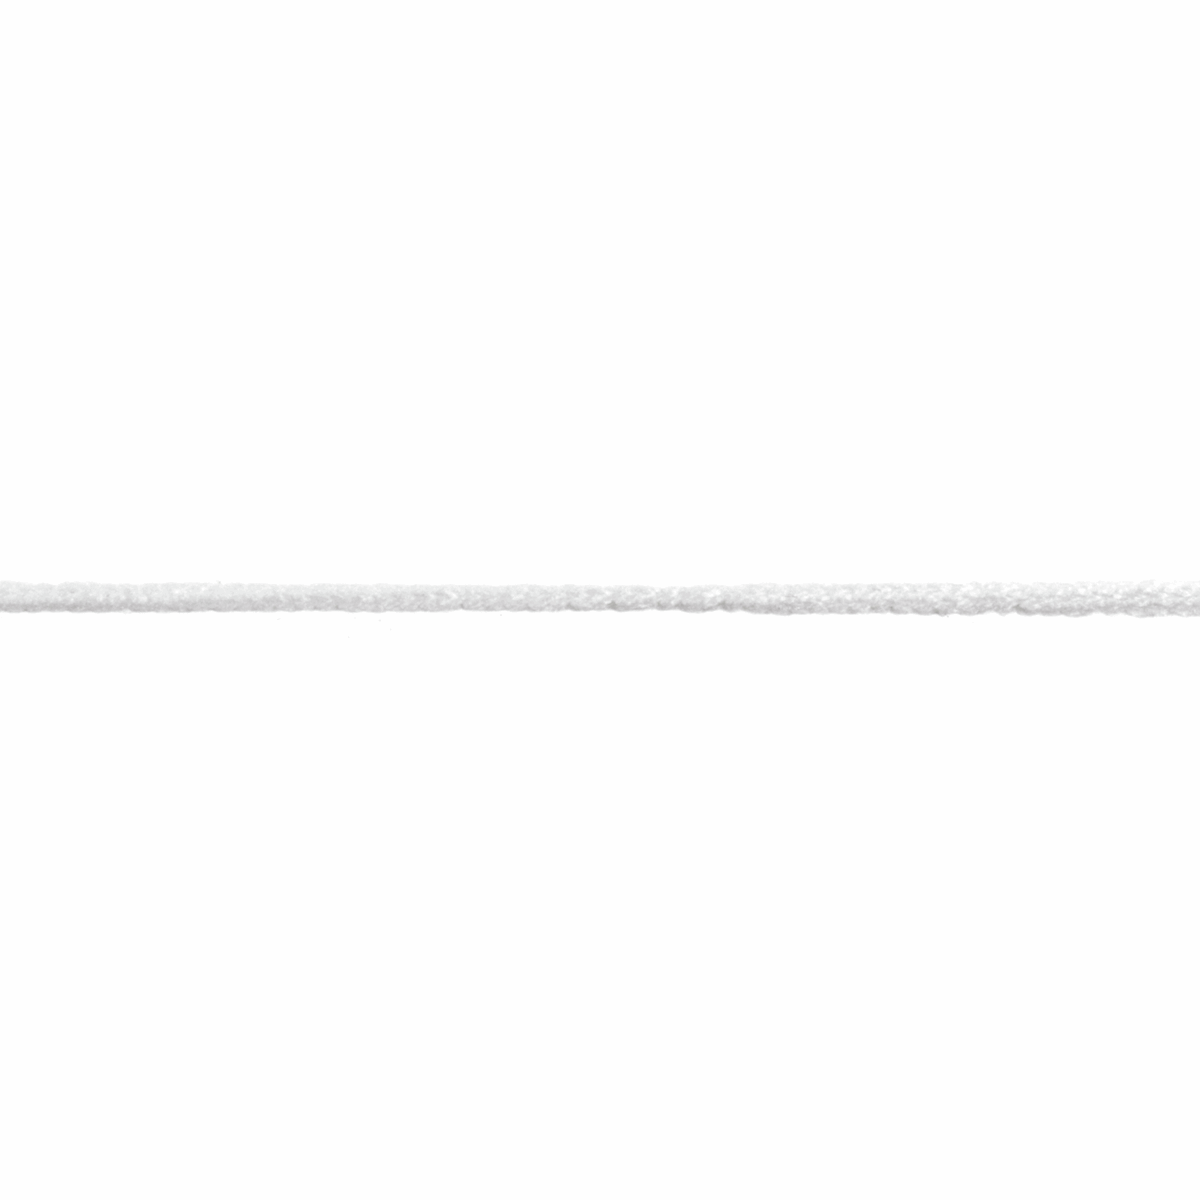 Face Mask Fuzzy Elastic White 2mm Wide (Per Metre)